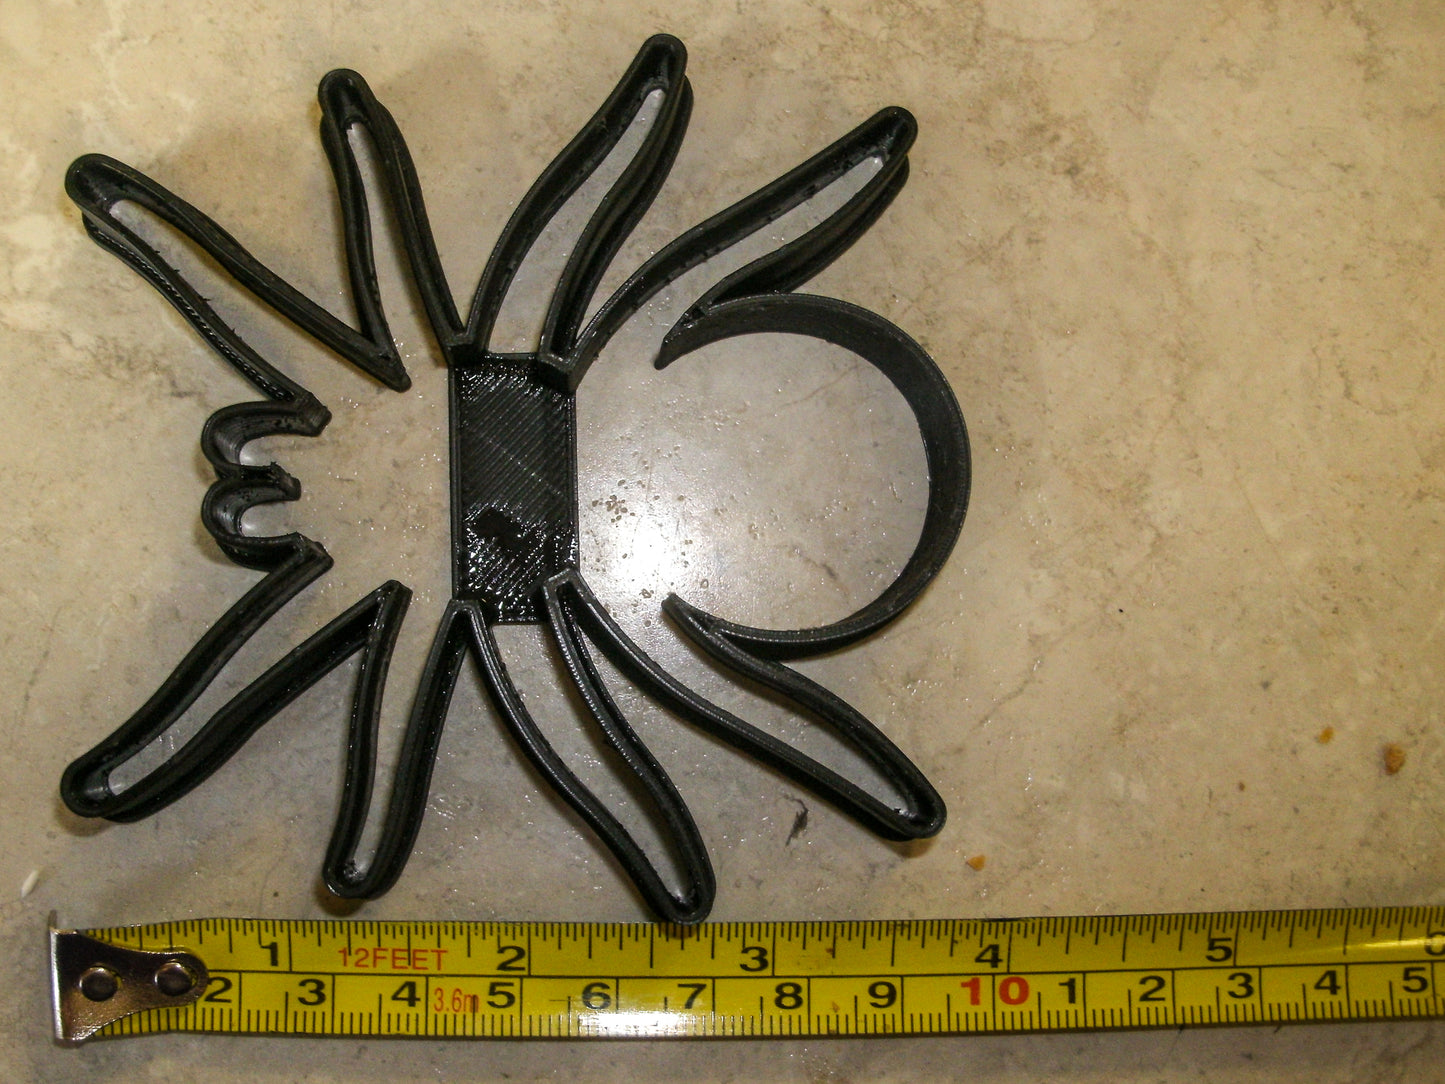 Spider Eight Legs Insect Halloween Scary Spiderman Cookie Cutter USA PR829